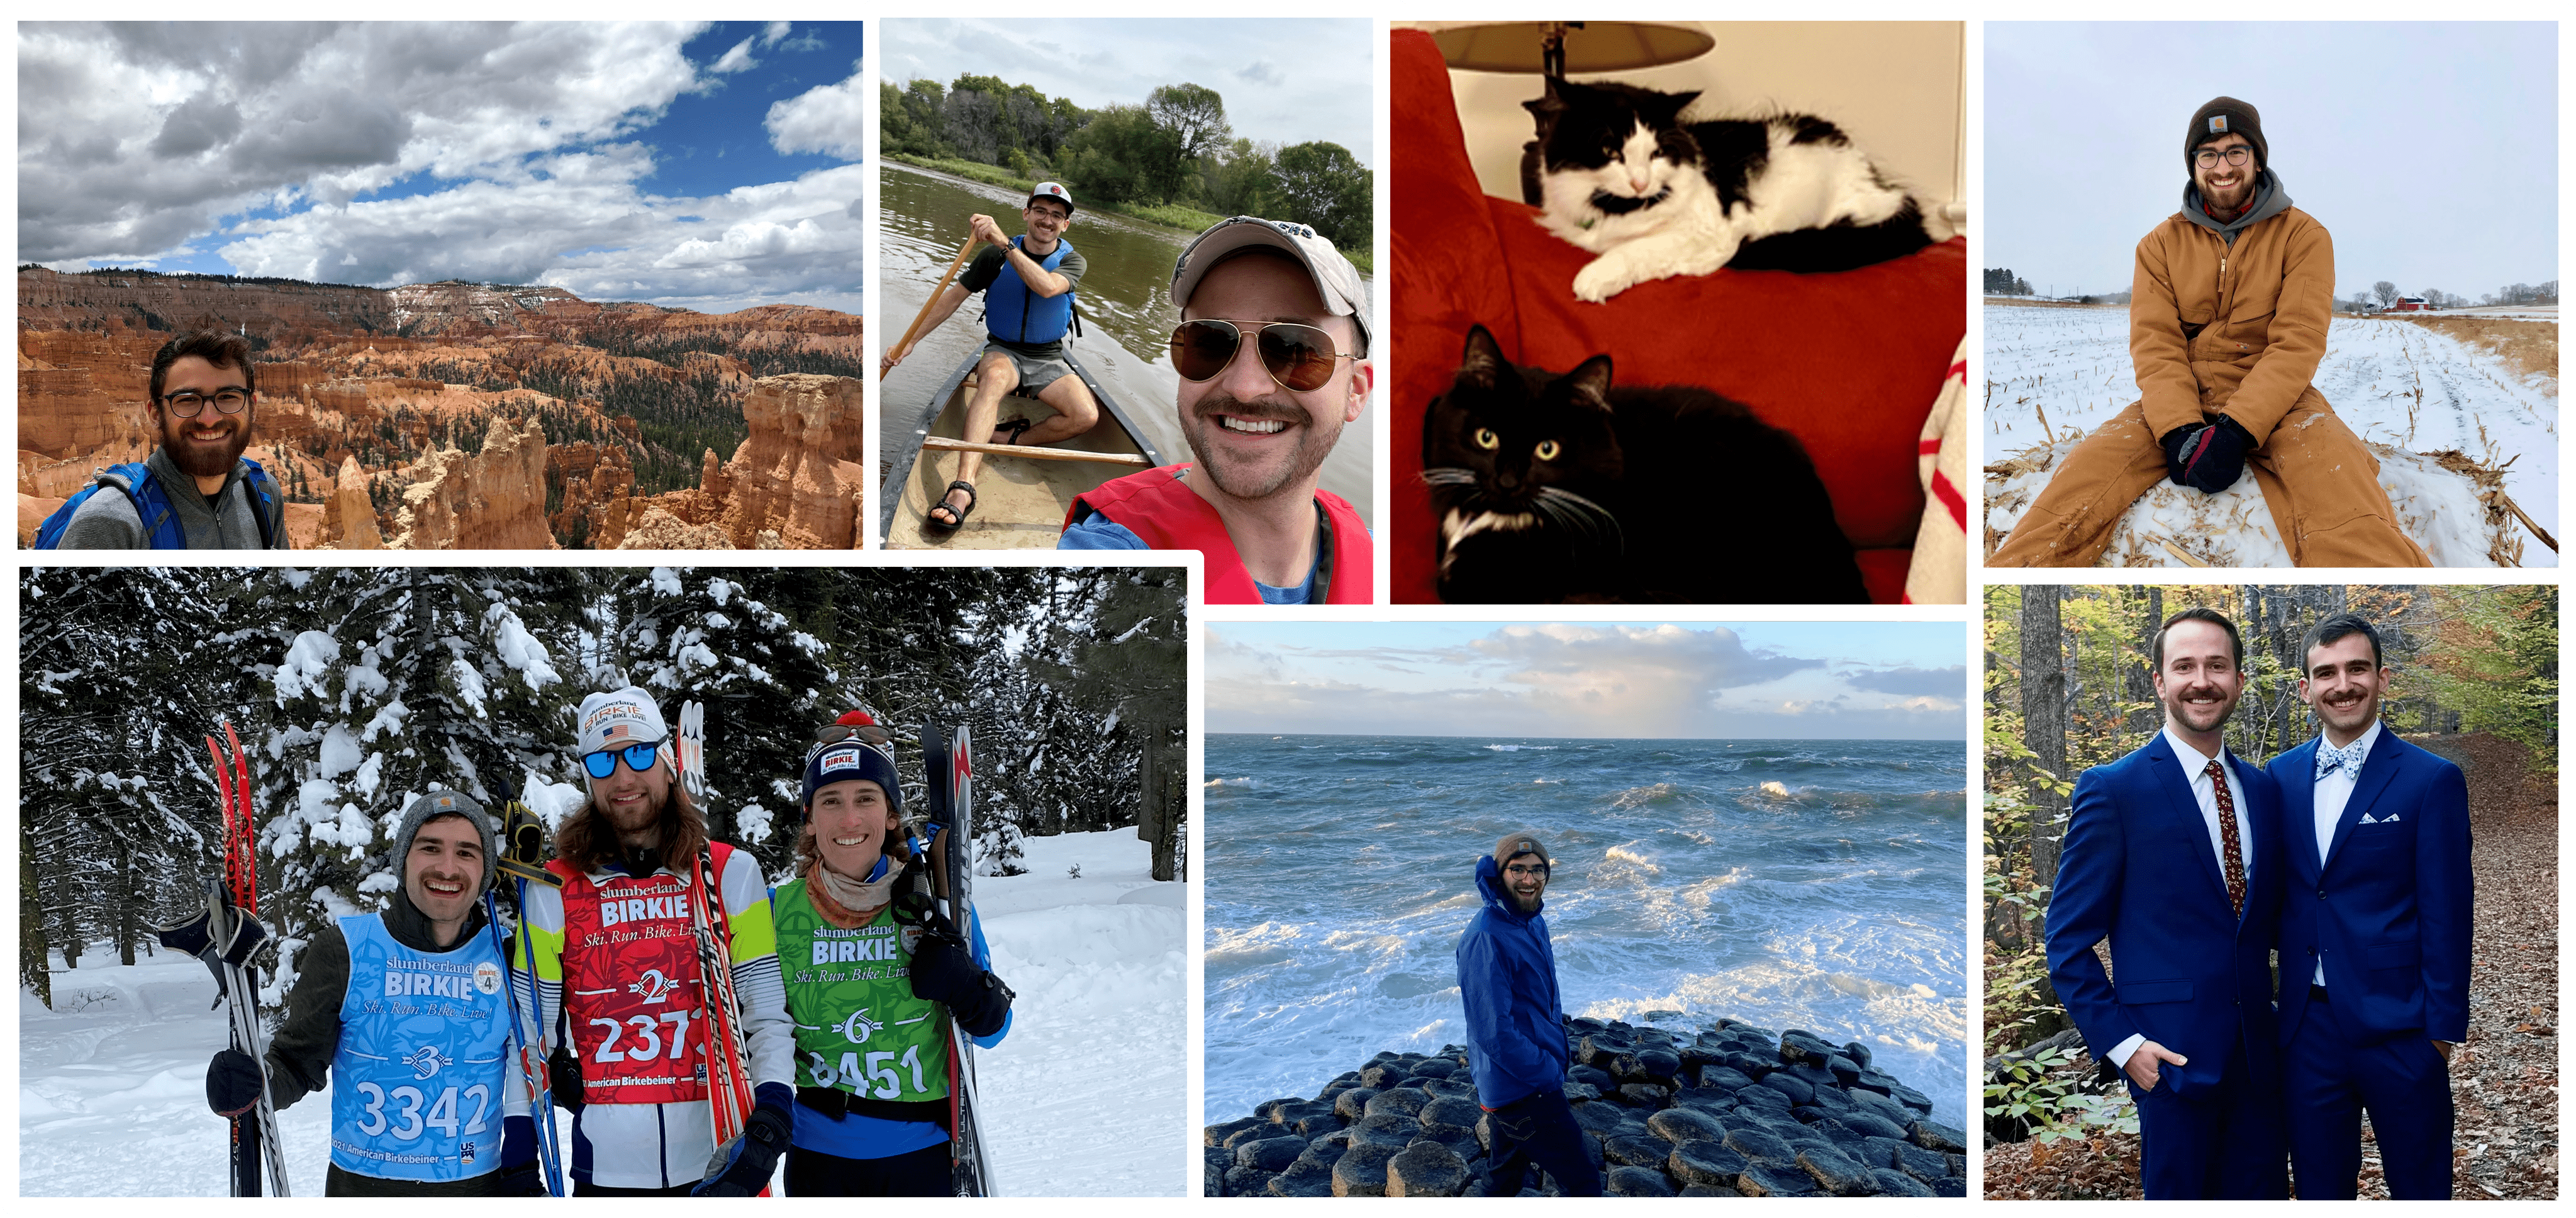 Collage of pictures of me, from left to right: Me in Bryce Canyon; my brother, his wife, and I after finishing a ski race; my boyfriend and I in a canoe; me at the Giant's Causeway in Northern Ireland; my two cats (one tuxedo, one holstein-patterned, both with long hair); me sitting on a snowy hay bale; and my boyfriend and I in blue suits on a forest path